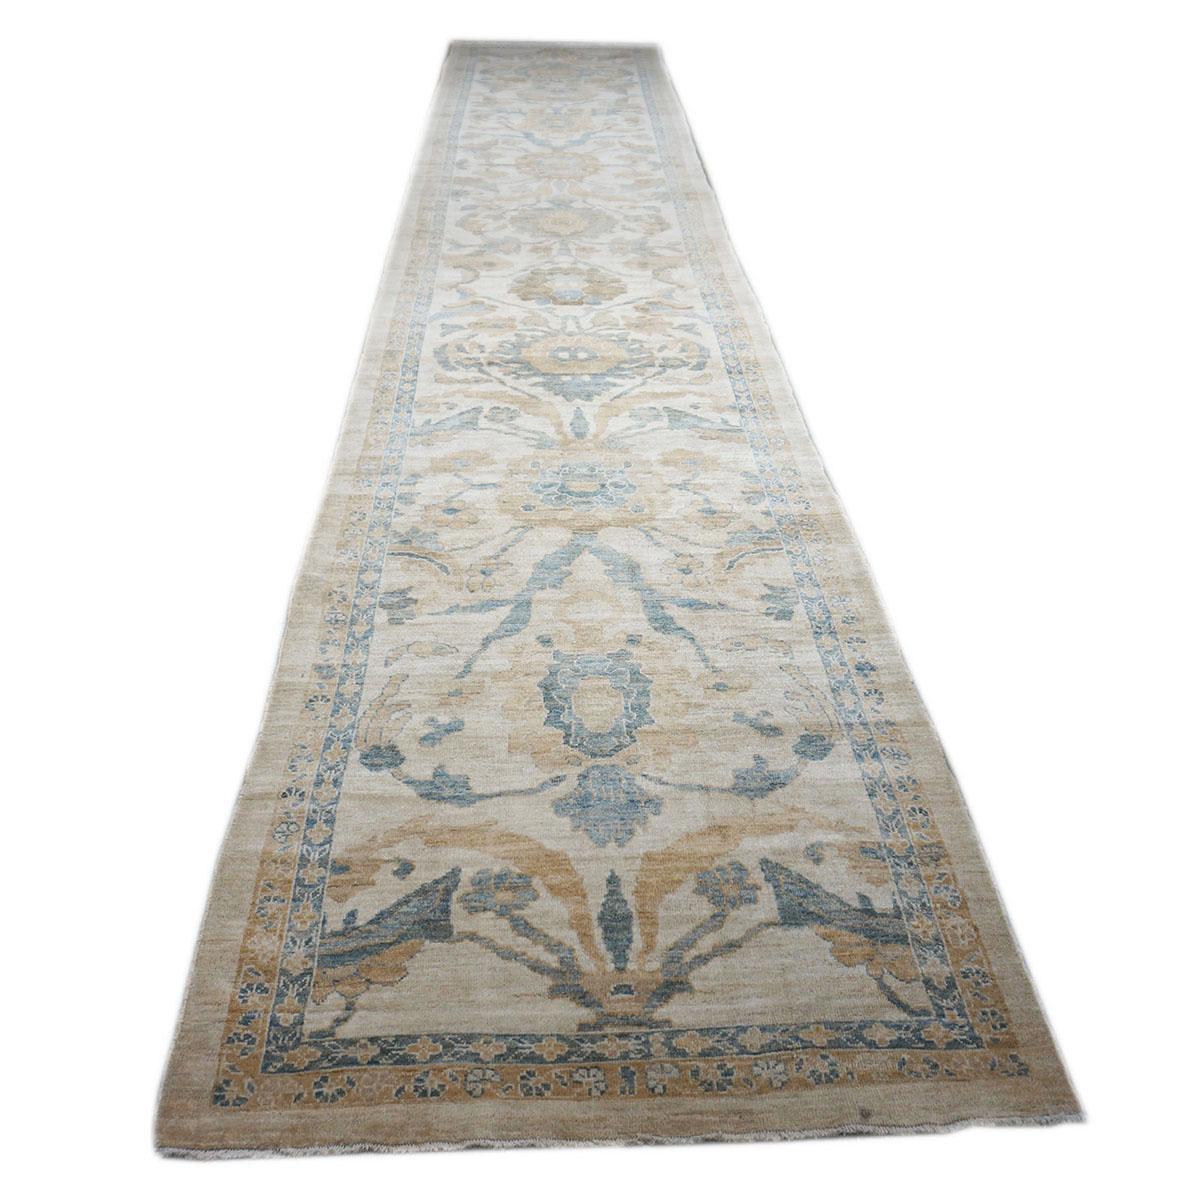 Ashly Fine Rugs presents an antique recreation of an original Persian Sultanabad hallway runner rug. Part of our own previous production, this antique recreation was thought of and created in-house and handmade in Persia by our master weavers. This